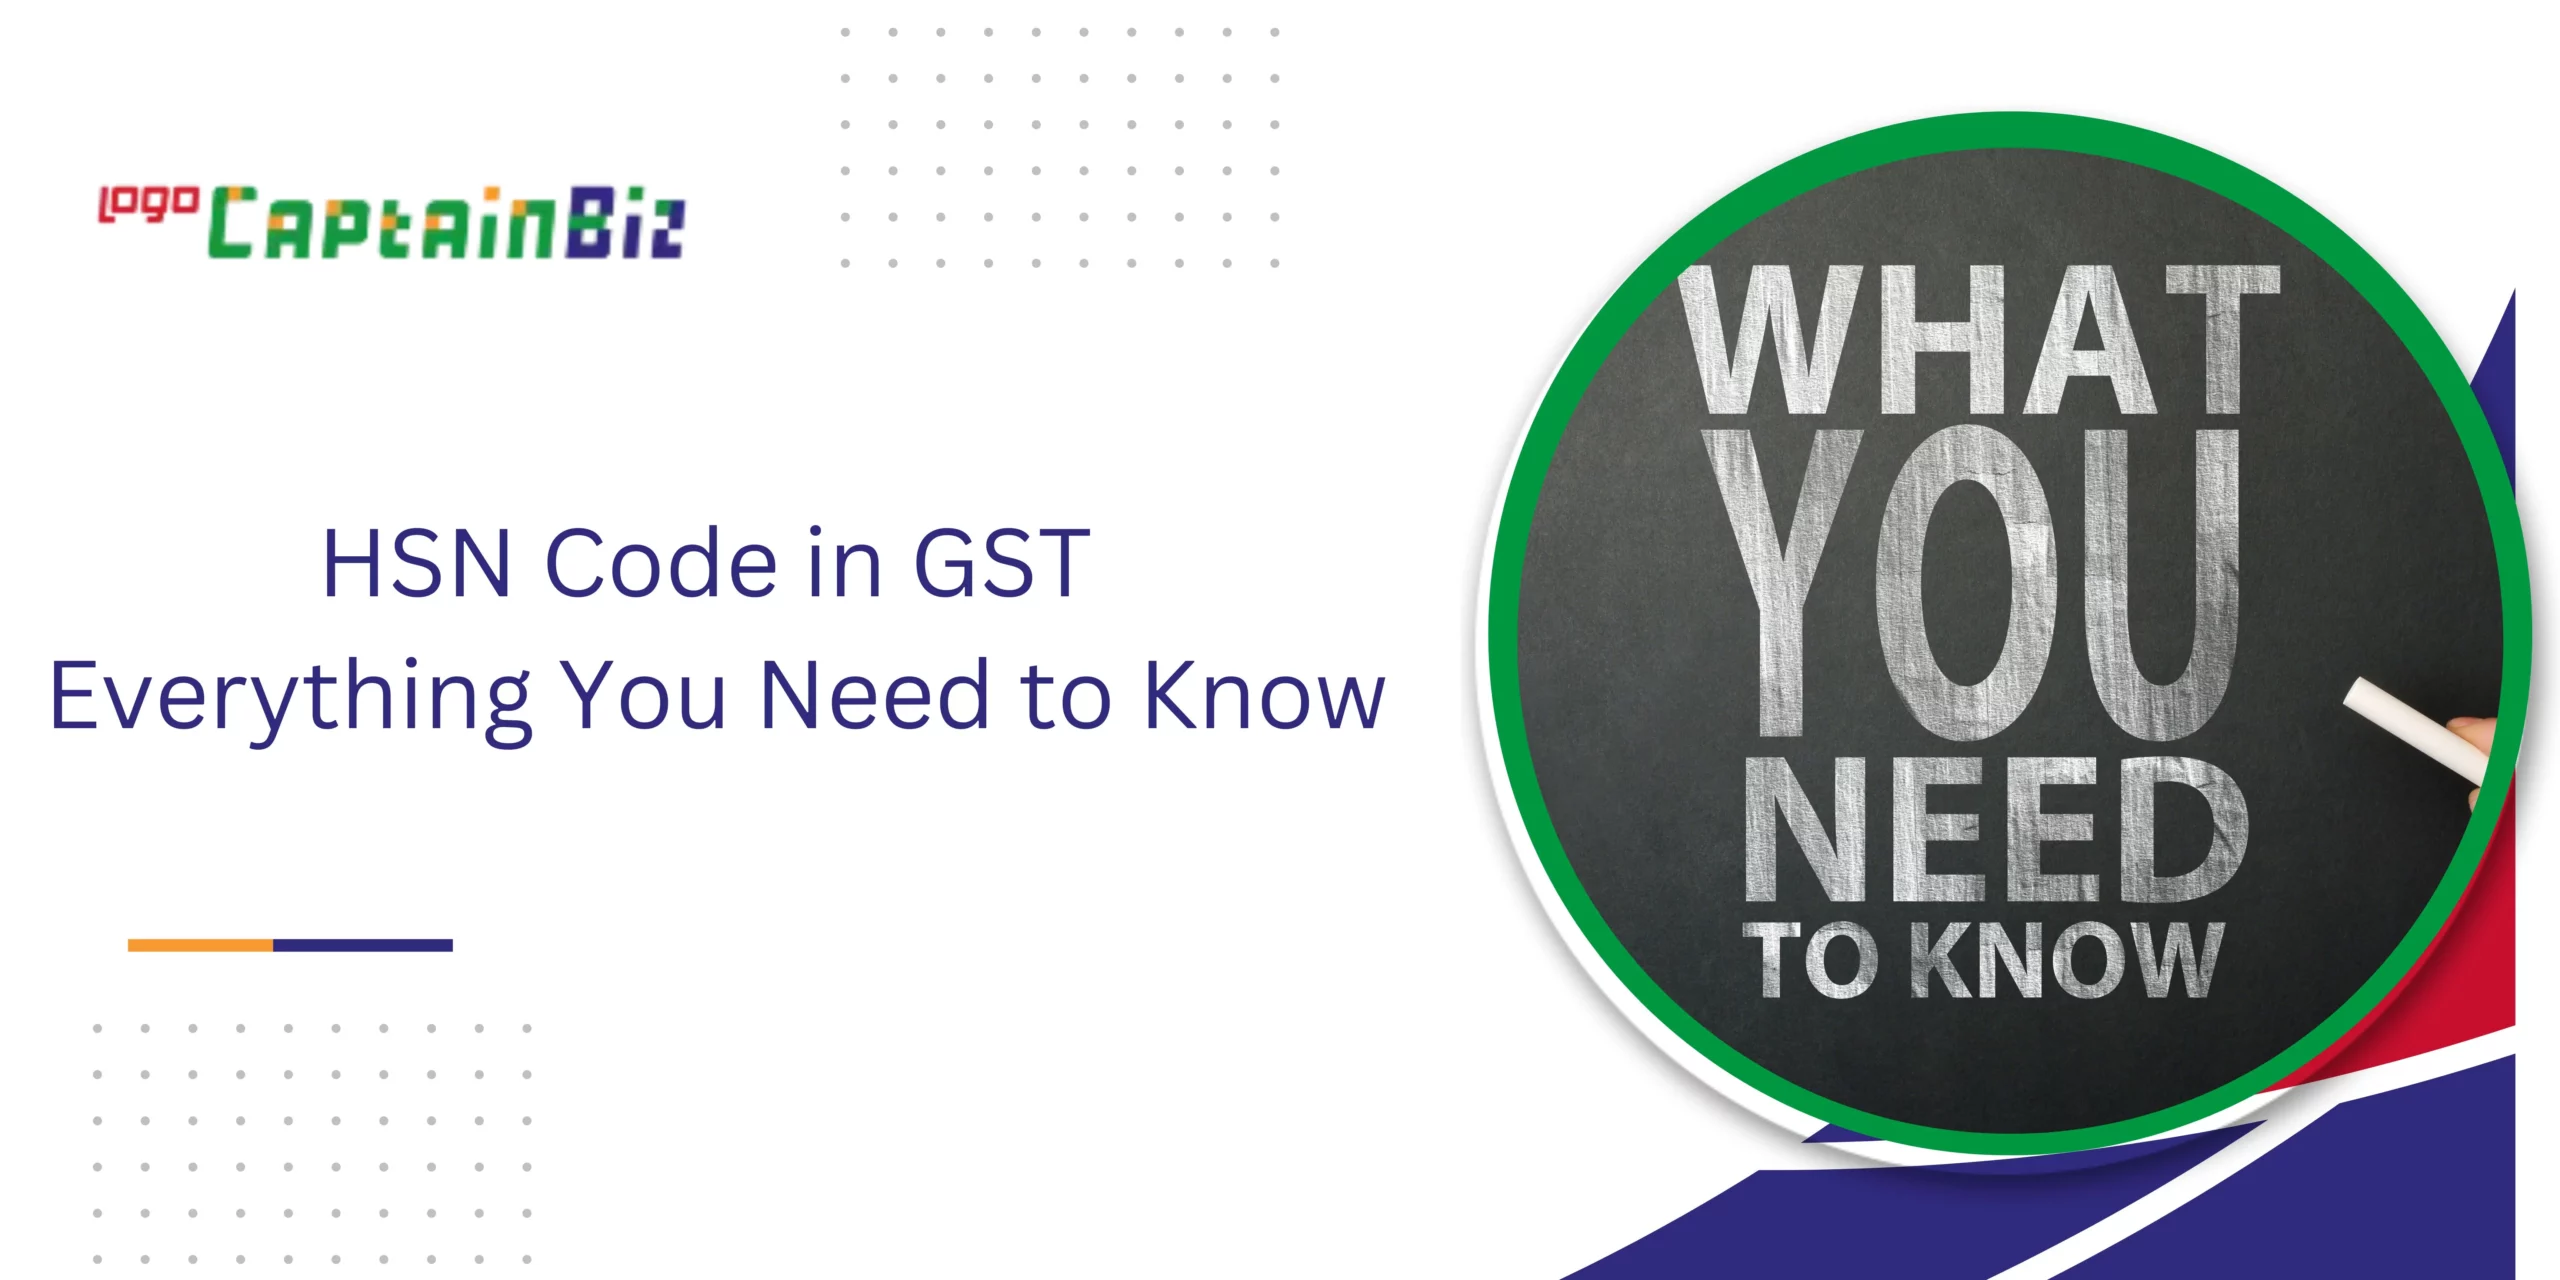 captainbiz hsn code in gst everything you need to know